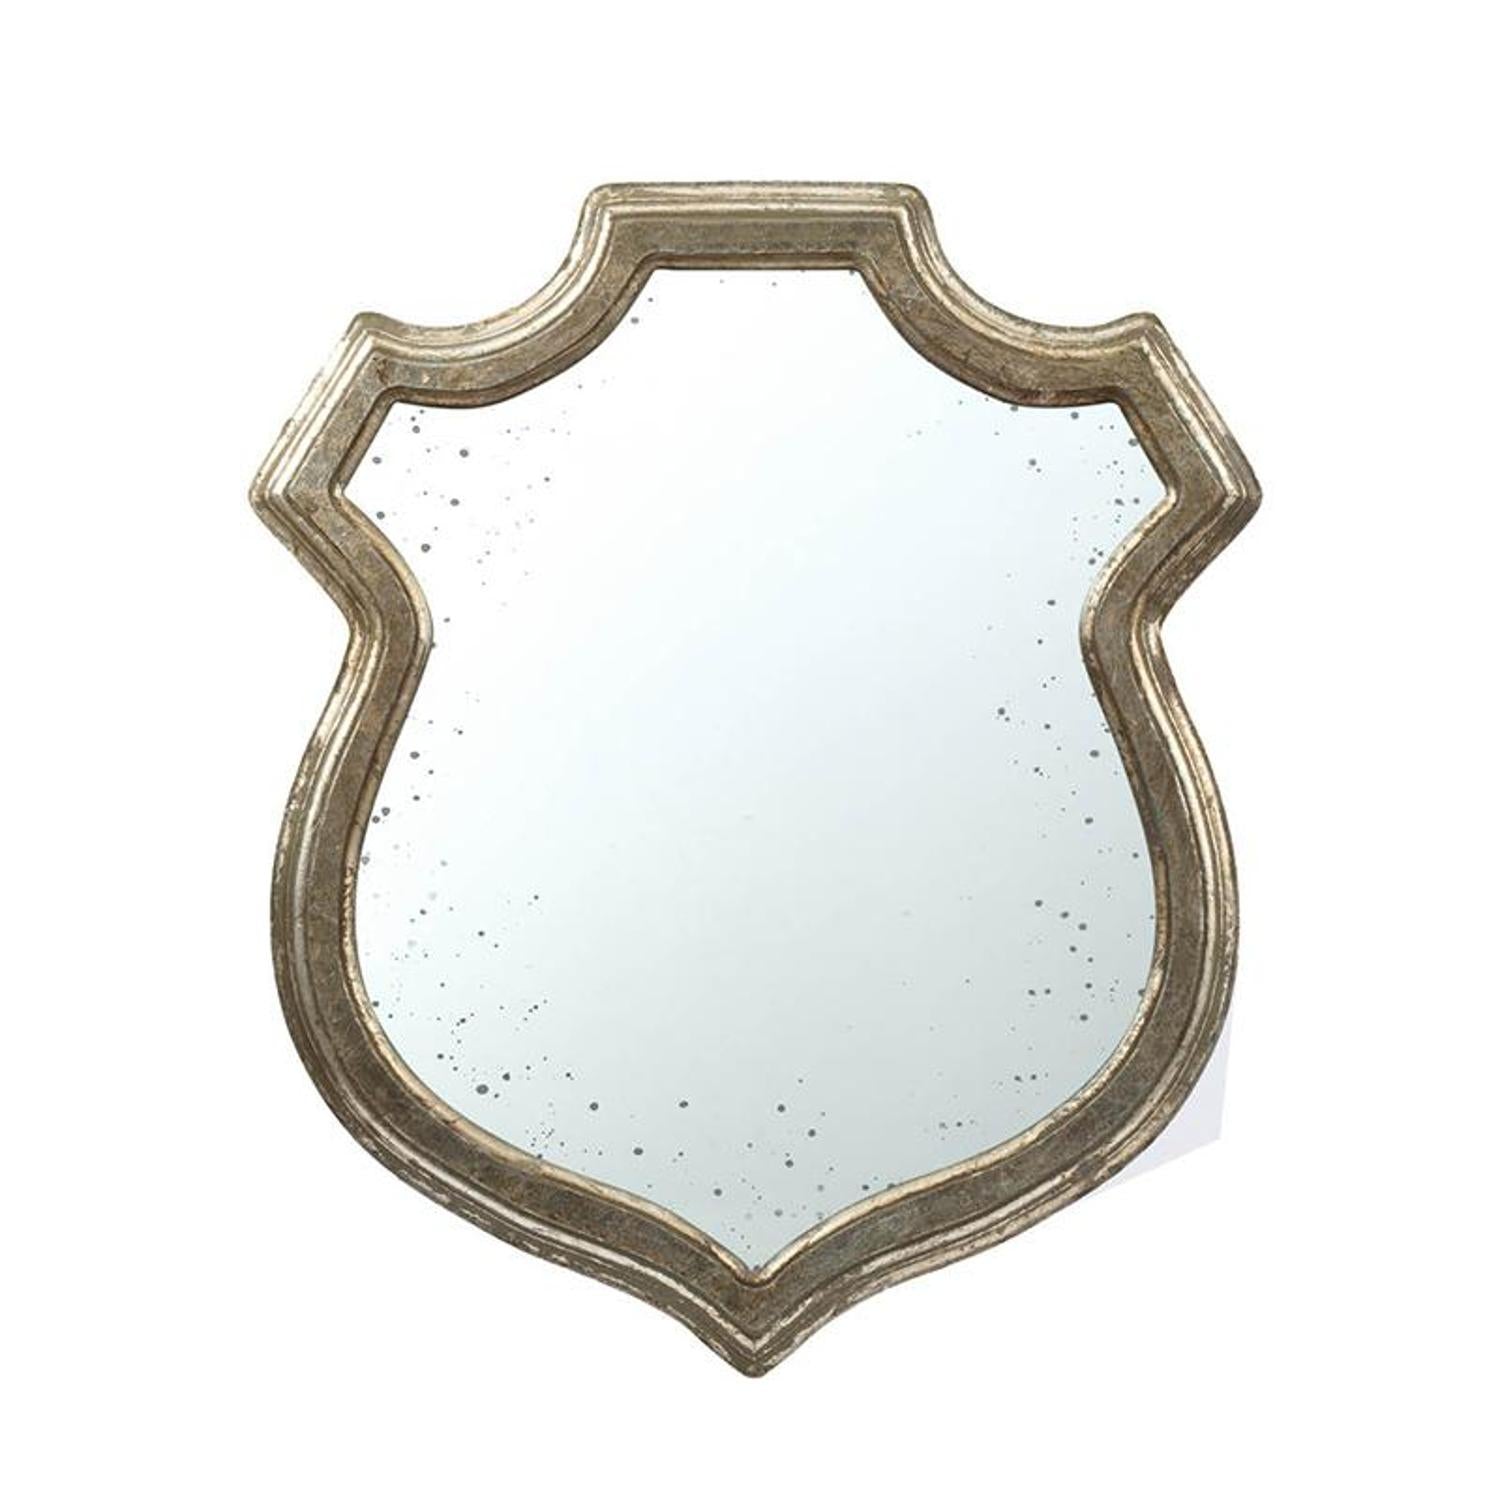 Distressed Metallic Crest Shape Accent Wall Mirror | 24